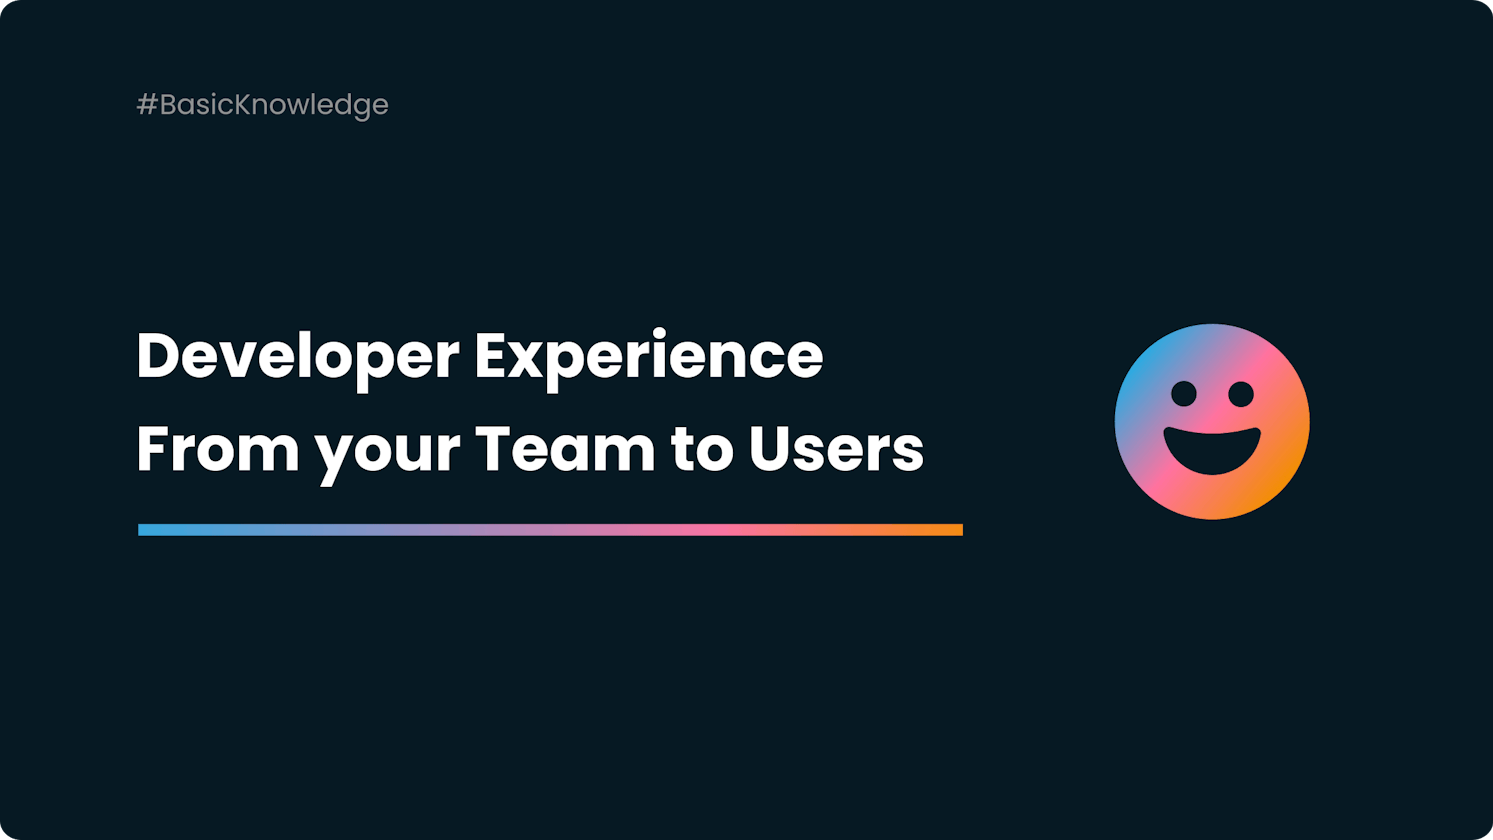 The Developer Experience, from your Own Team to your End-Users